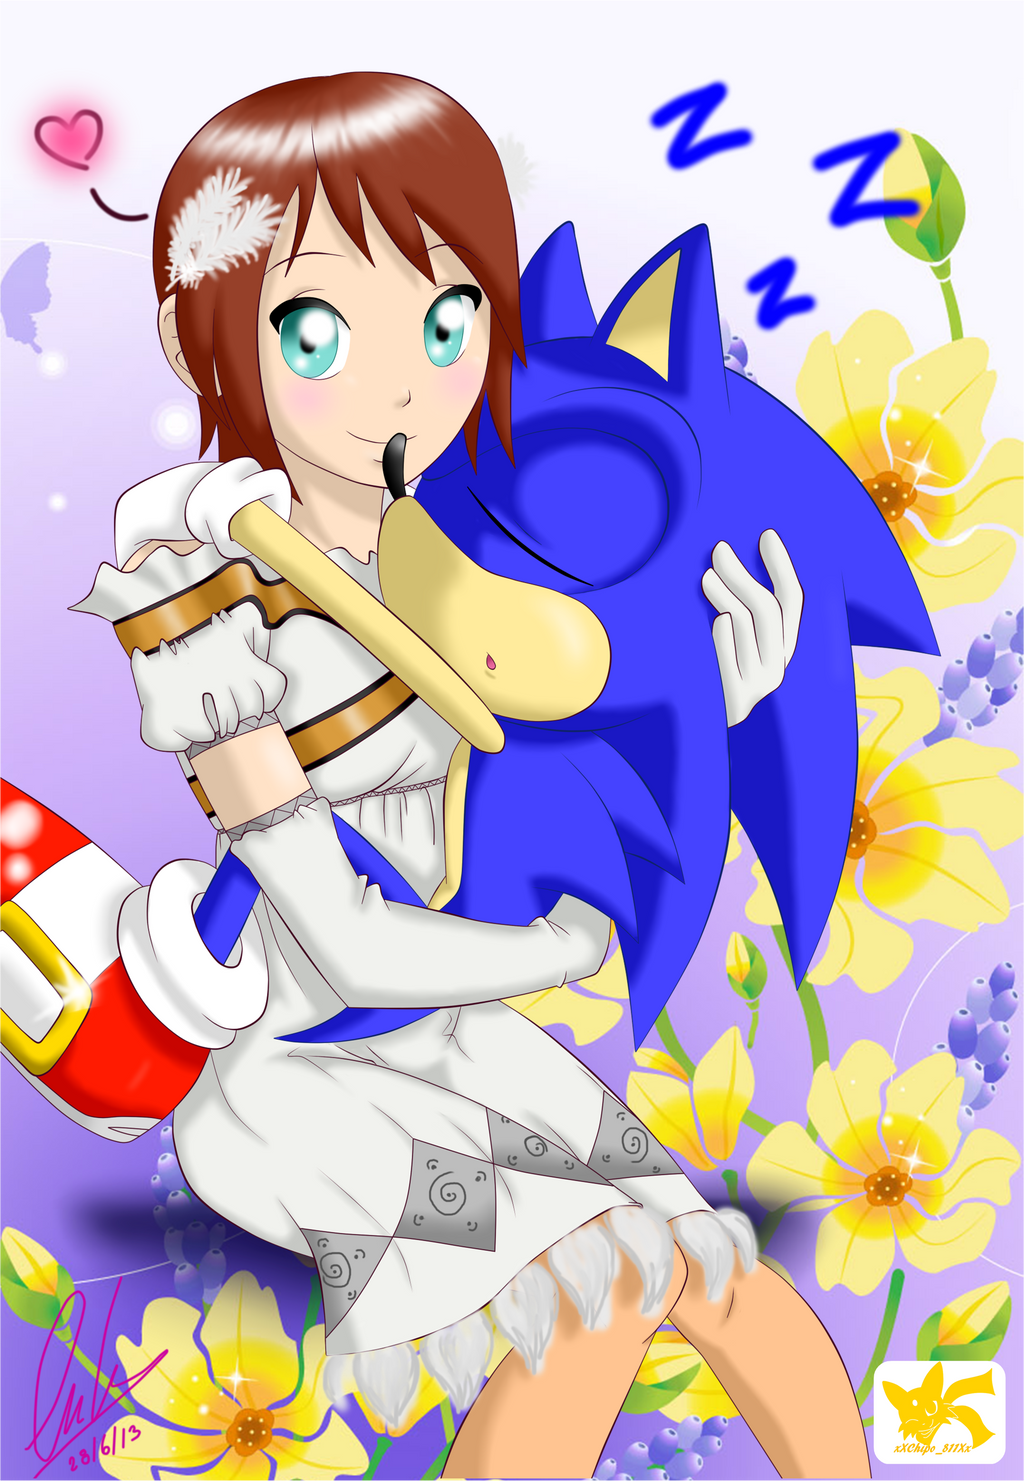 Esp/Eng] Sonic and Elise (with Tails) Fanart